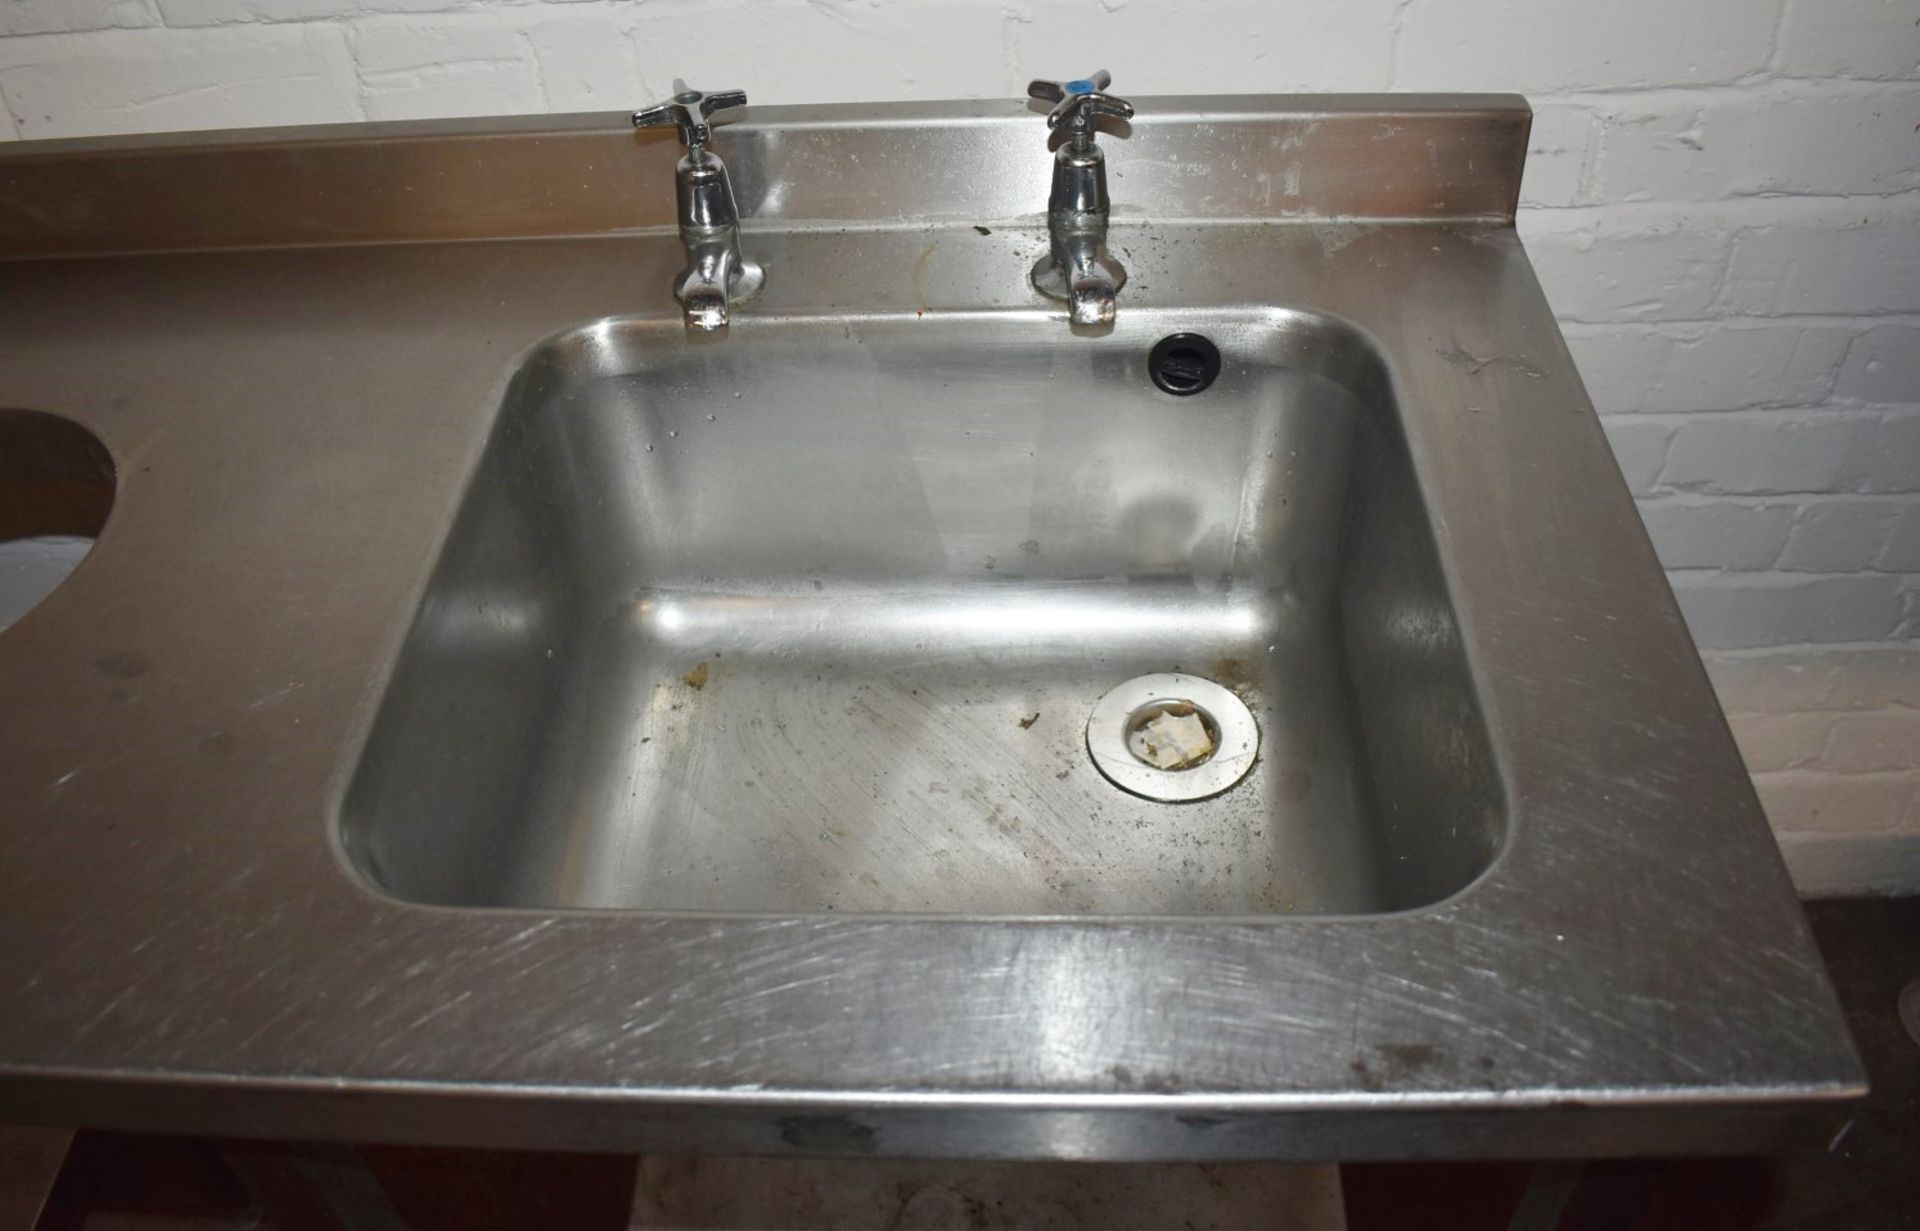 1 x Stainless Steel Sink Unt Featuring Single Wash Bowl, Taps, Prep Area and Central Waste Bin Chute - Image 2 of 8